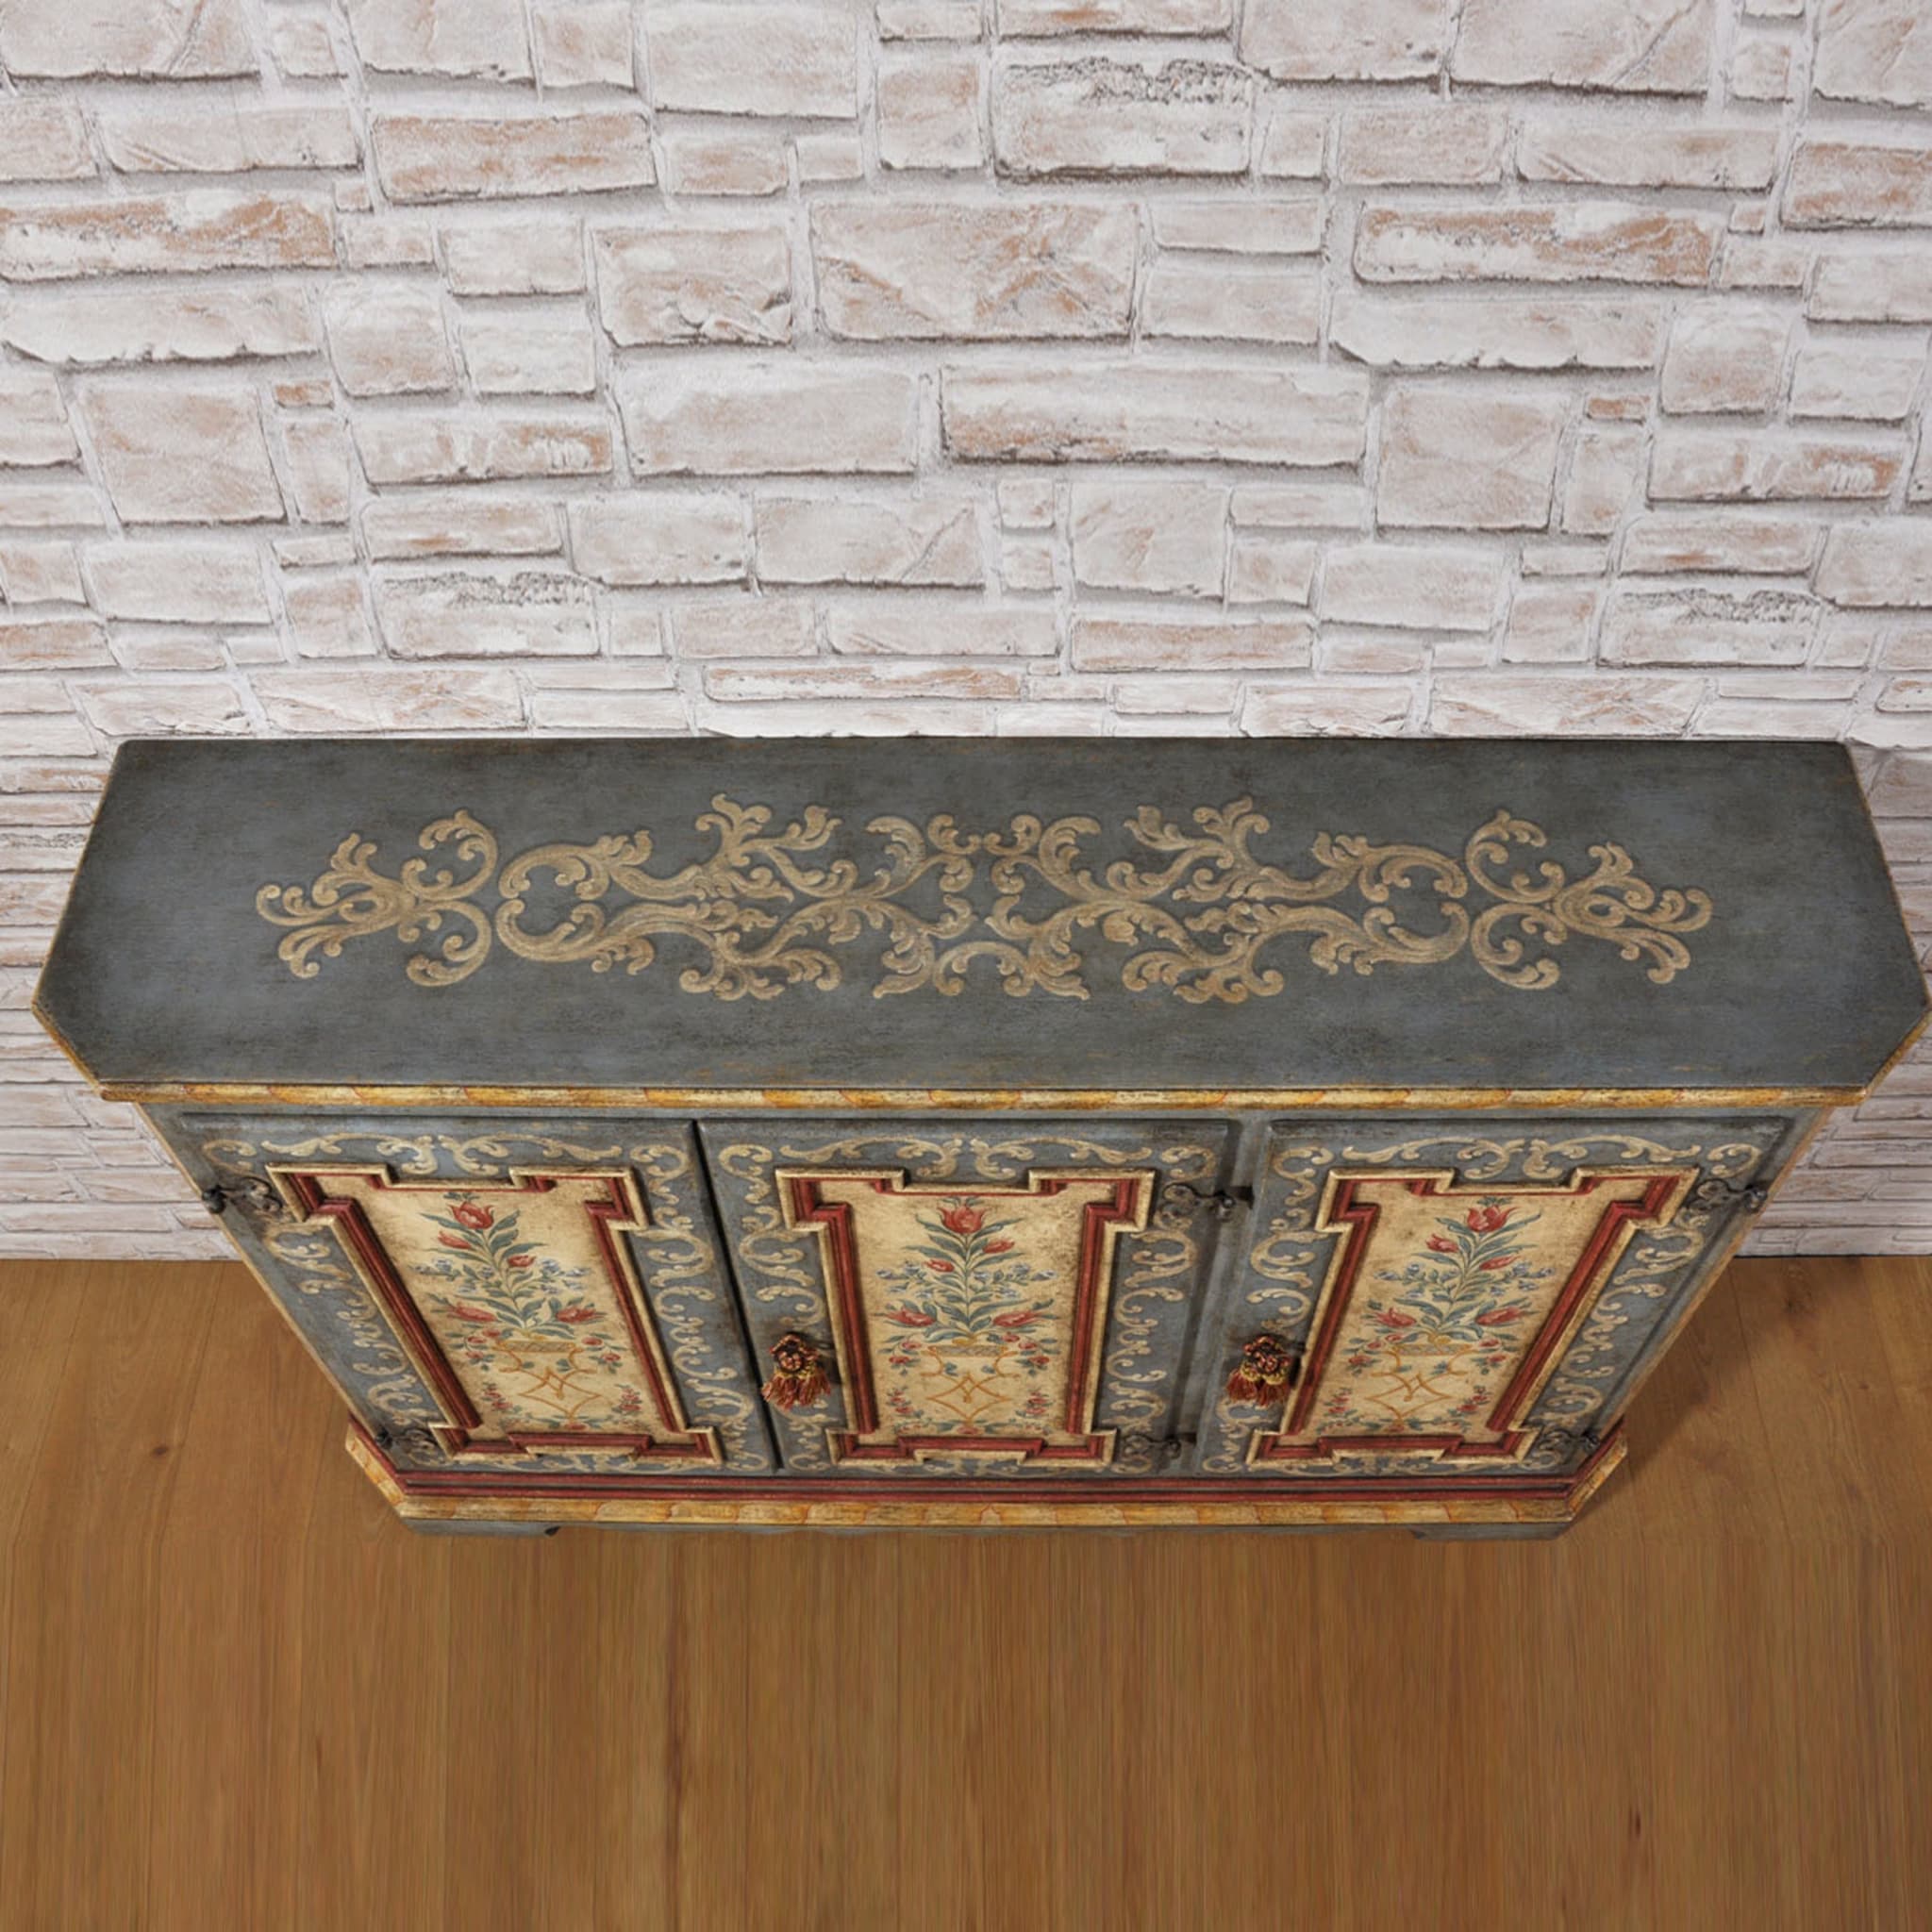 18th-Century Baroque Tyrolean-Style Floral Sideboard - Alternative view 4